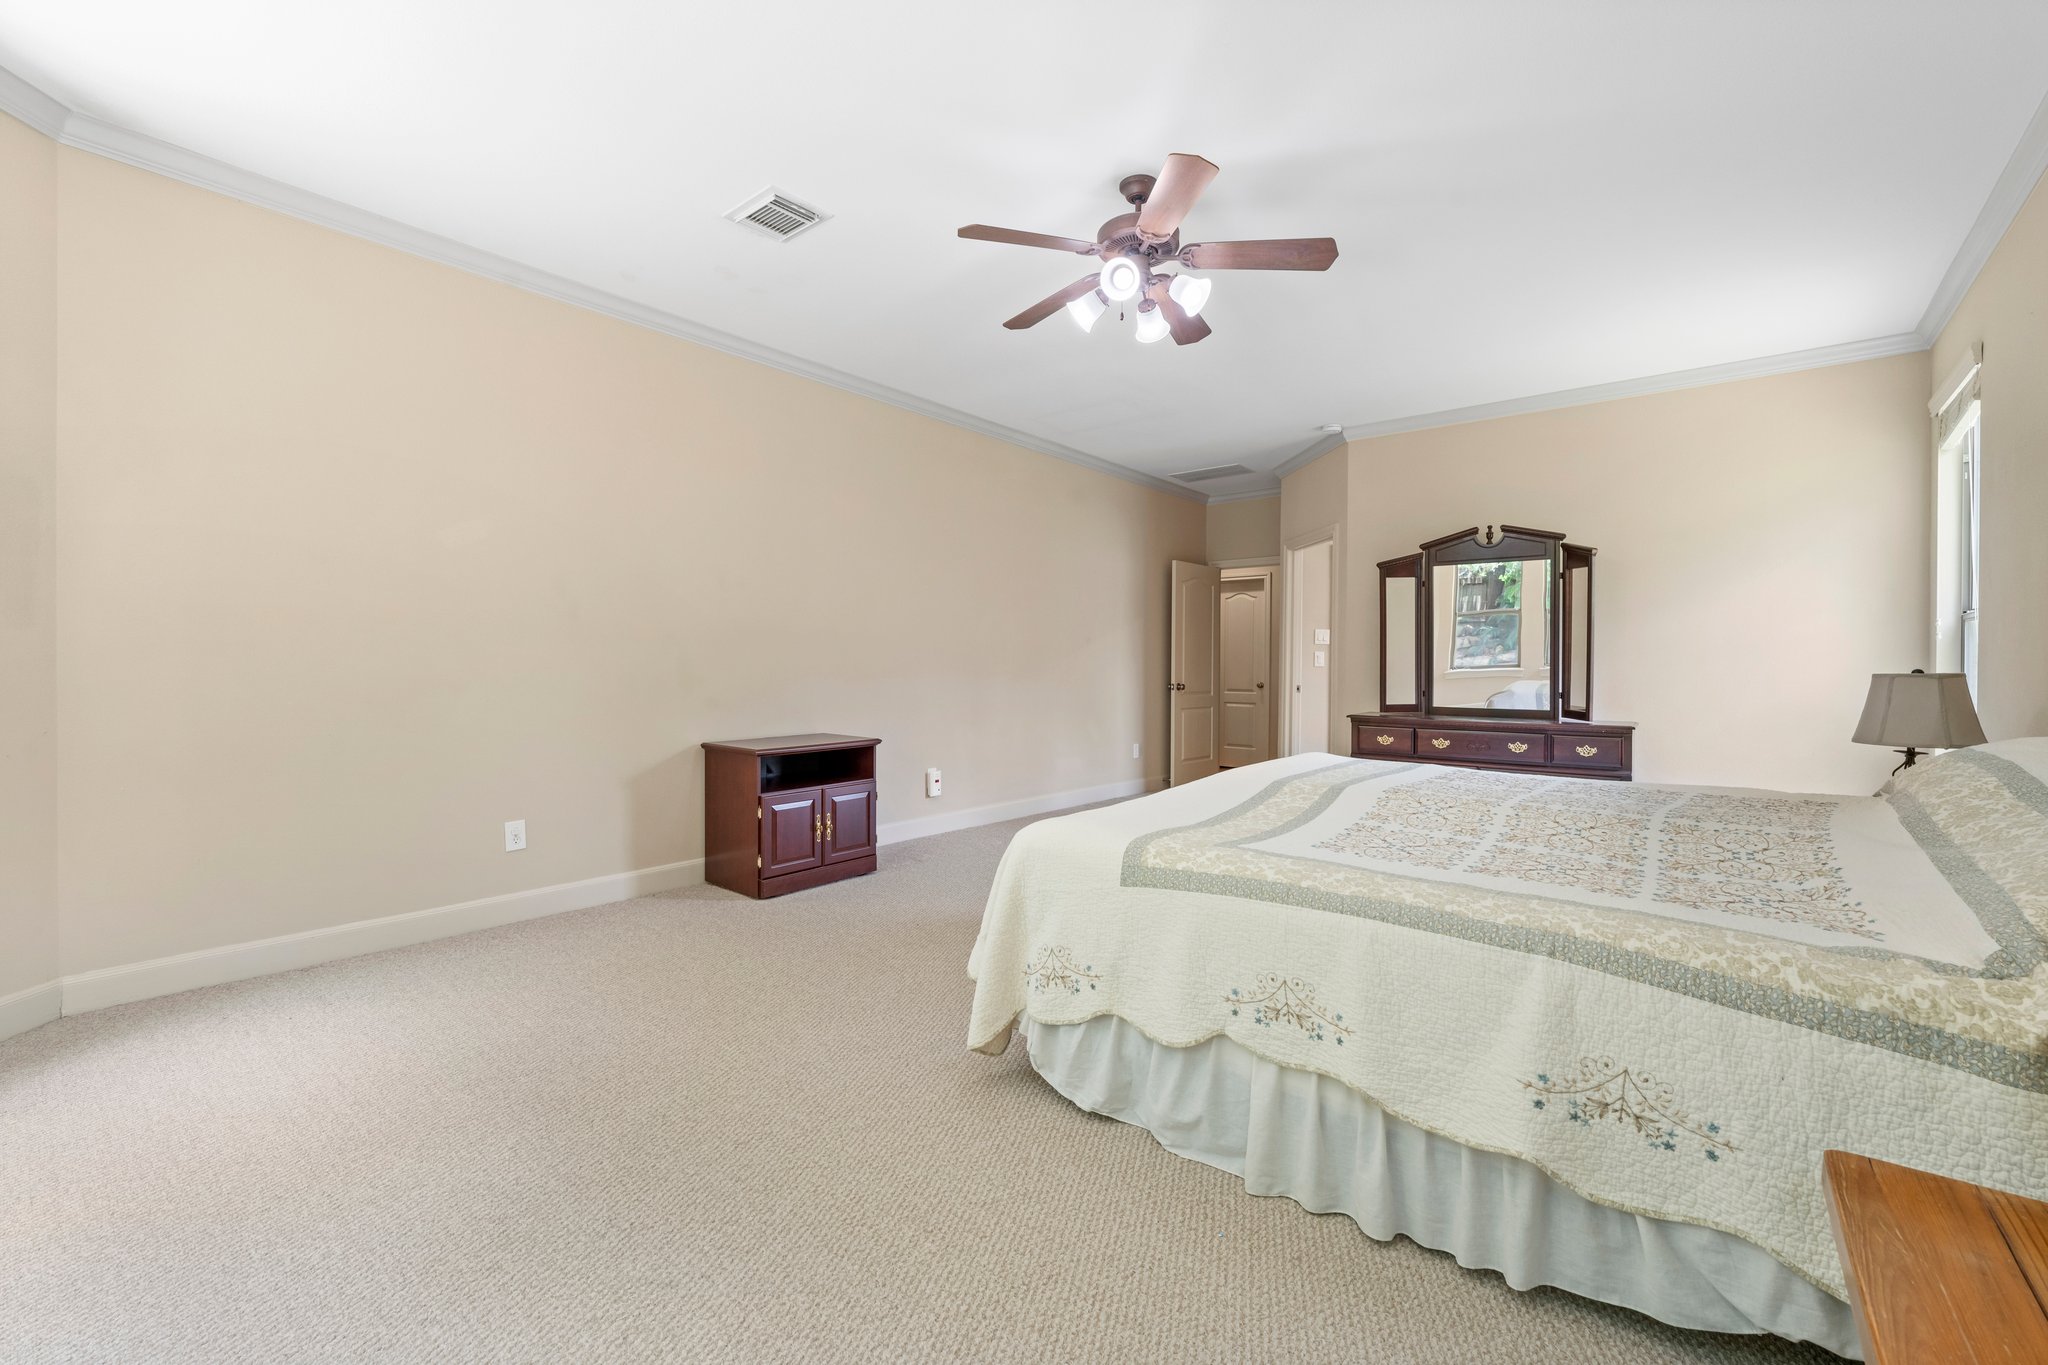 View of primary bedroom with crown molding, ceiling fan, and a California King bed showing how spacious the room is.